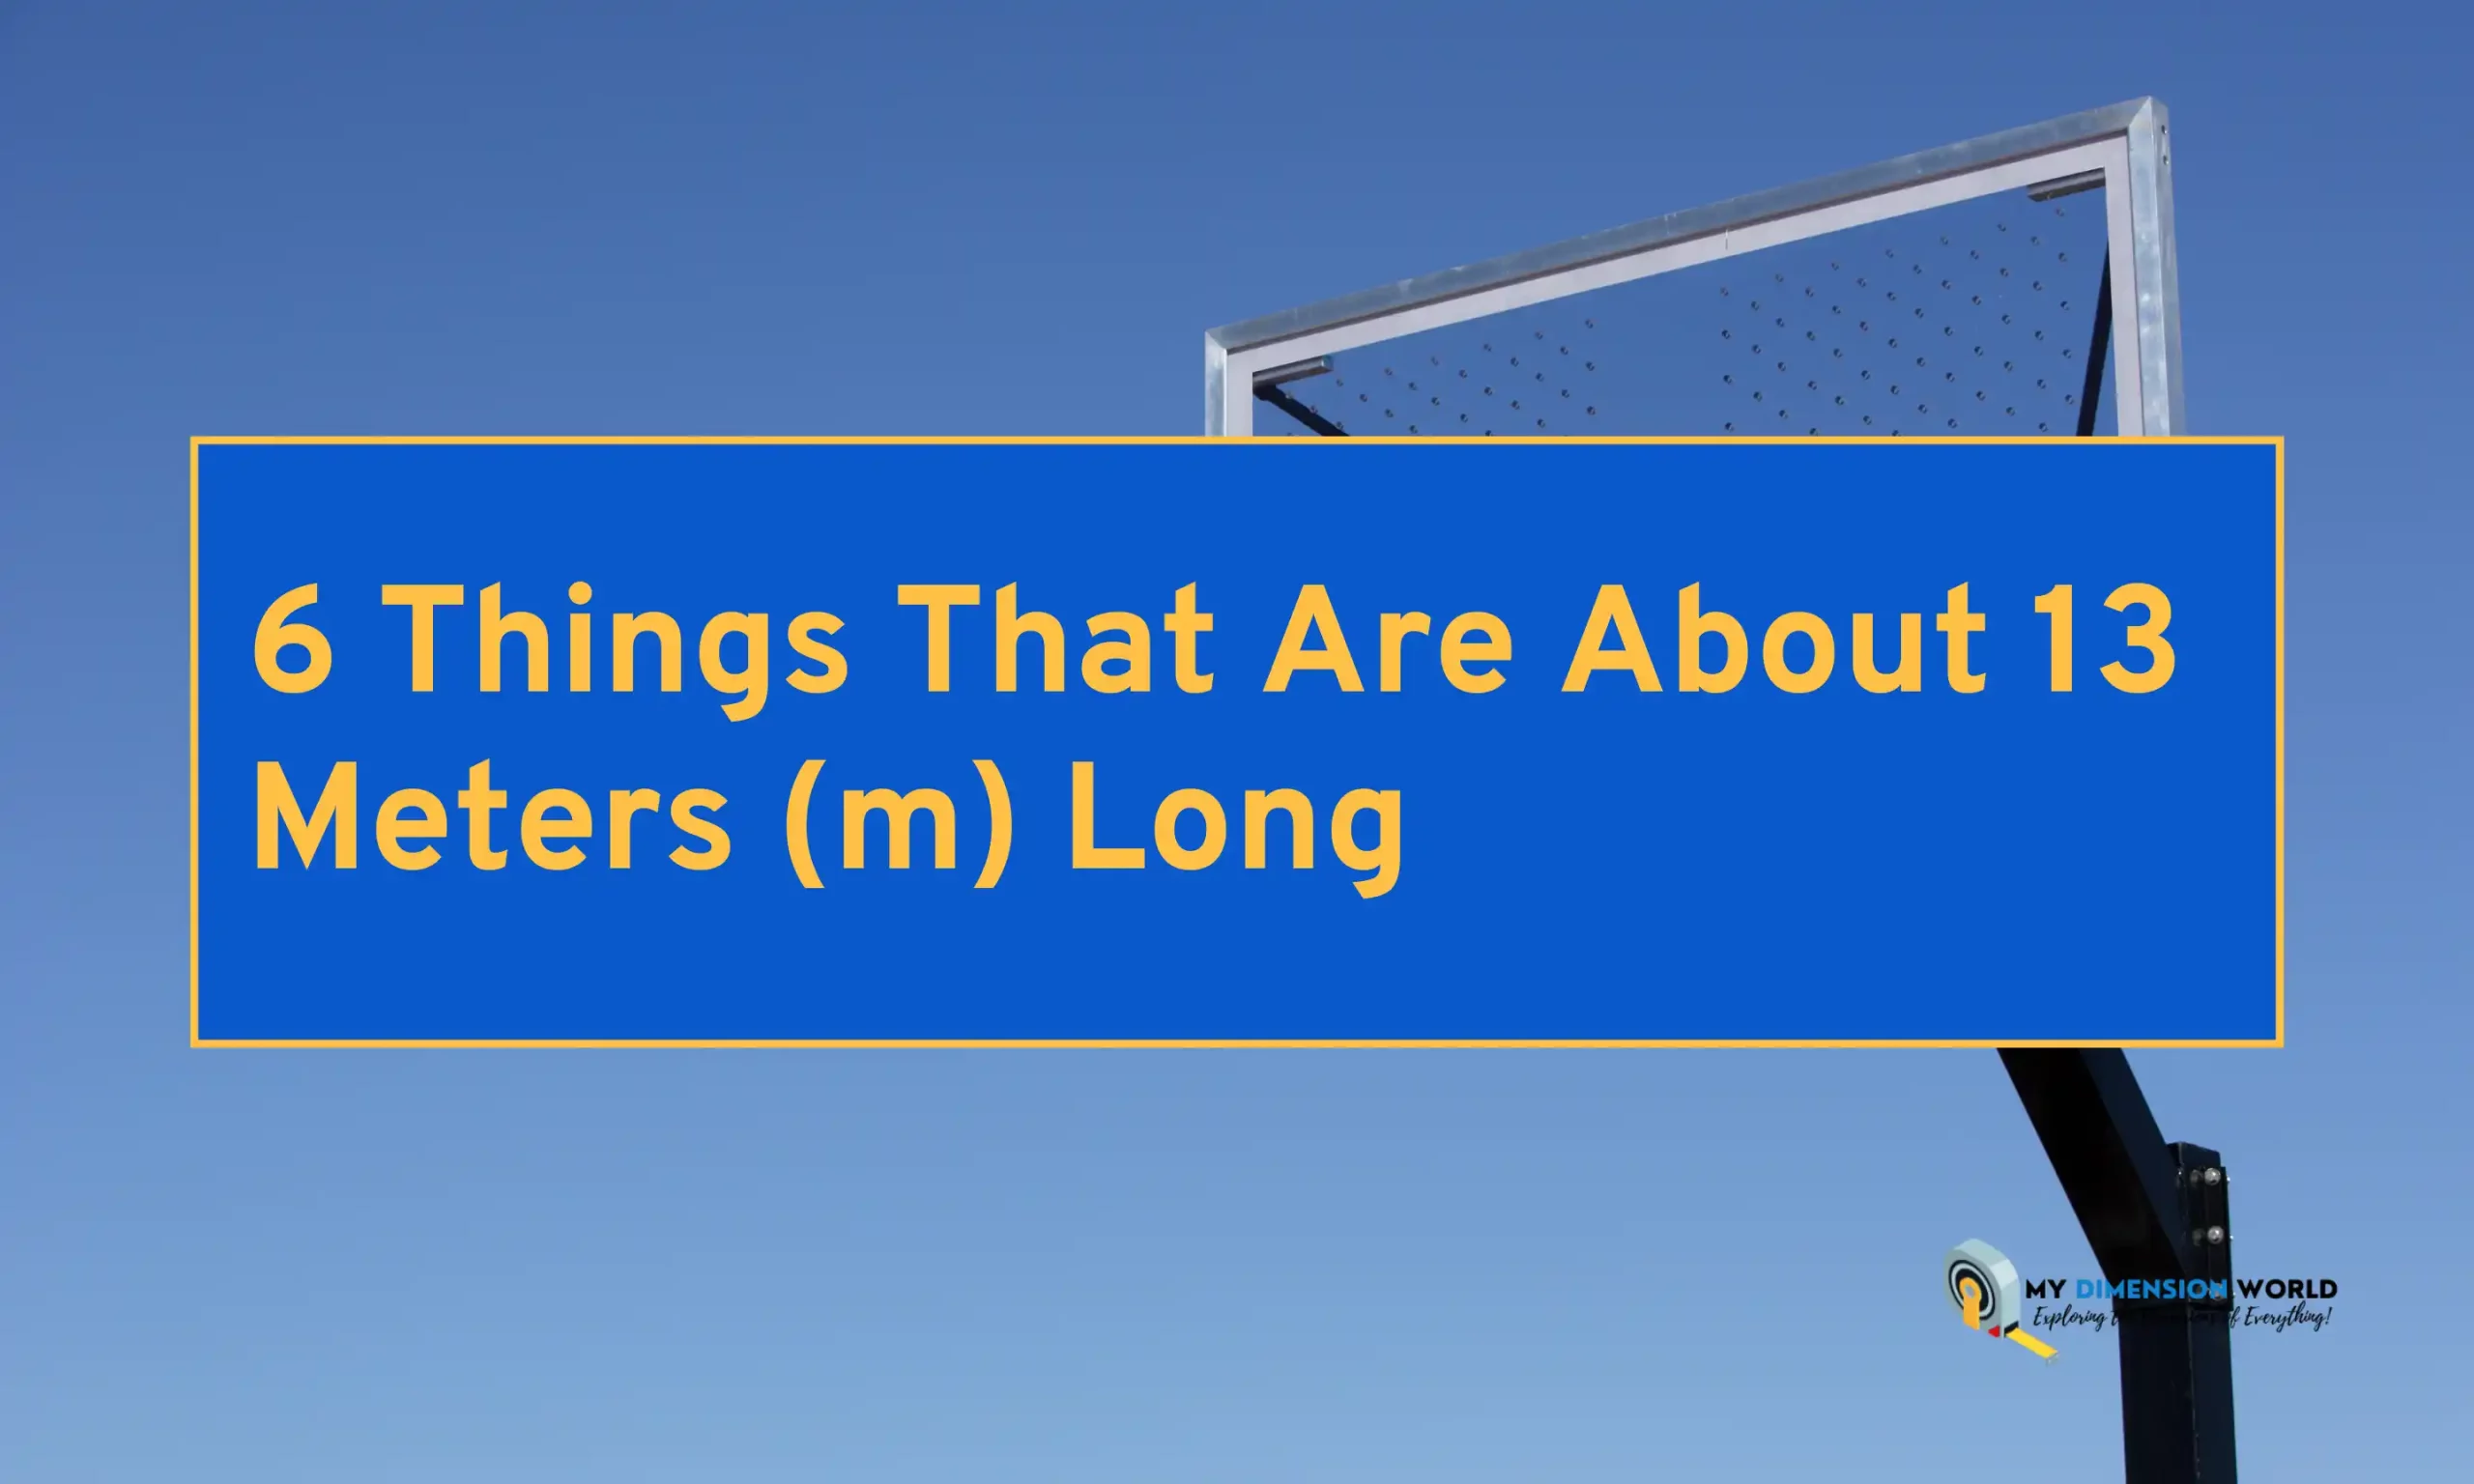 6 Things That Are About 13 Meters (m) Long